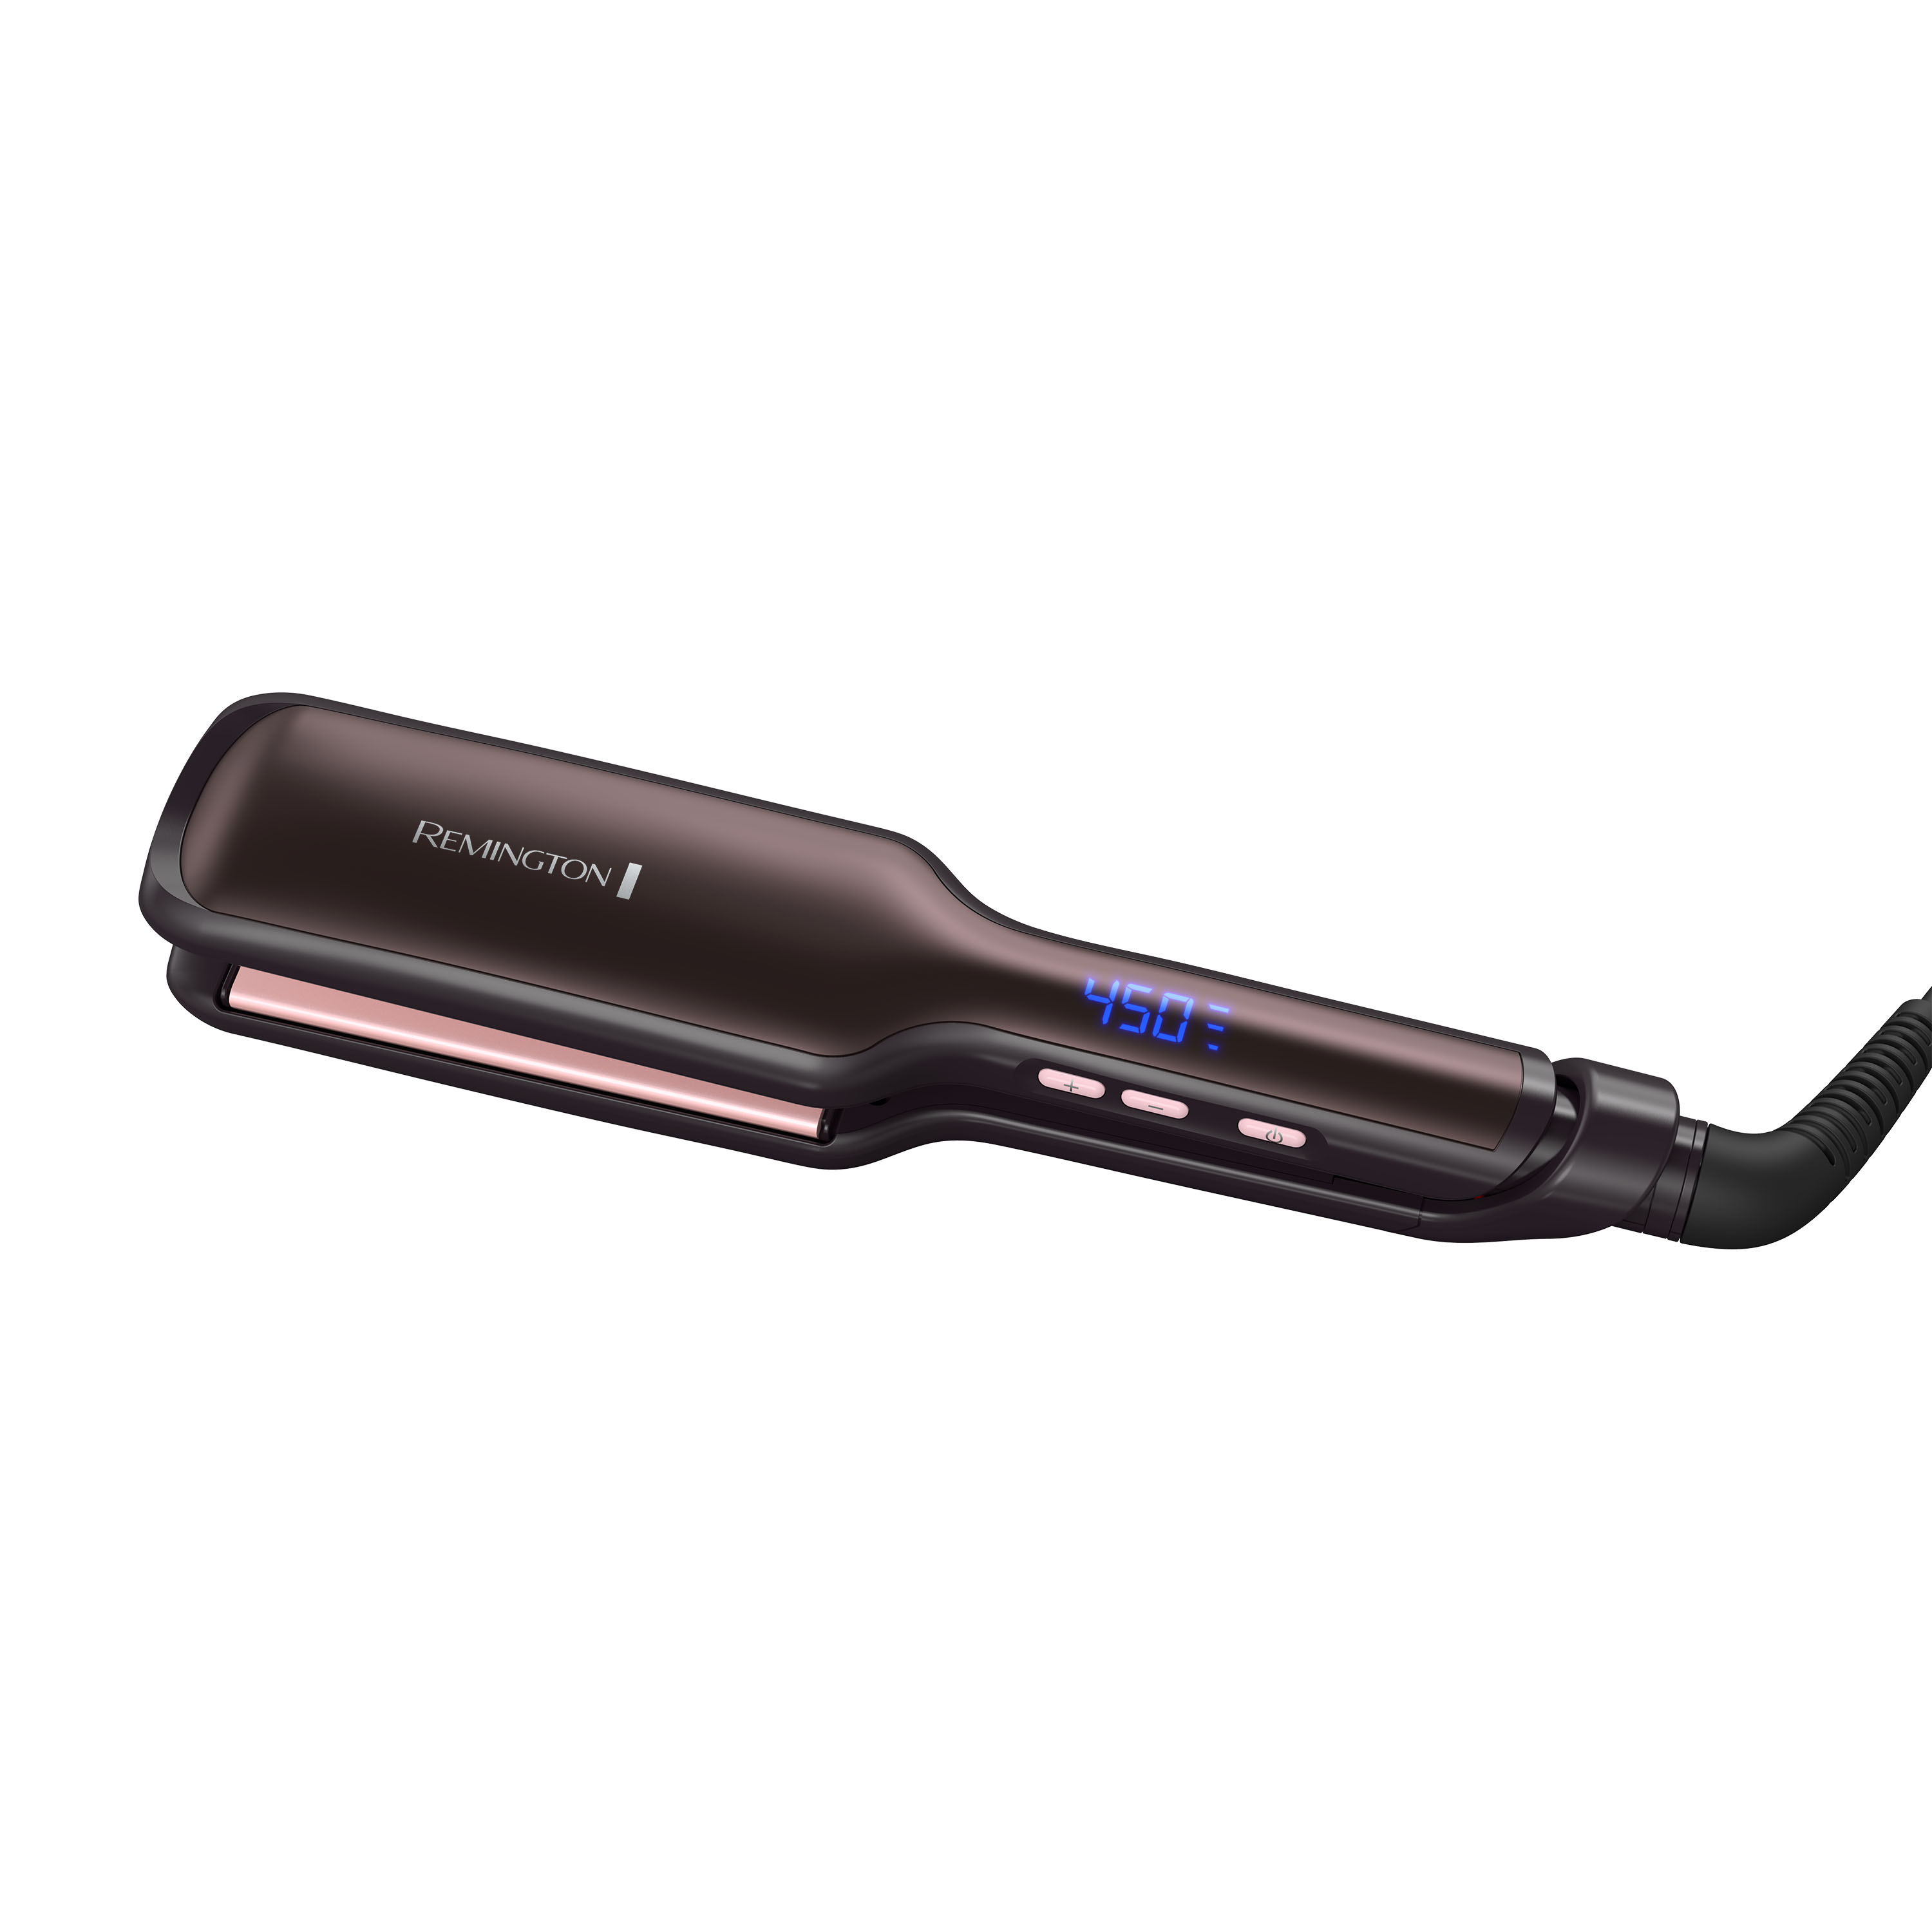 Remington Pro Soft Touch Finish and Digital Controls Professional 2" Pearl Ceramic Flat Iron Hair Straightener, Black - image 15 of 15